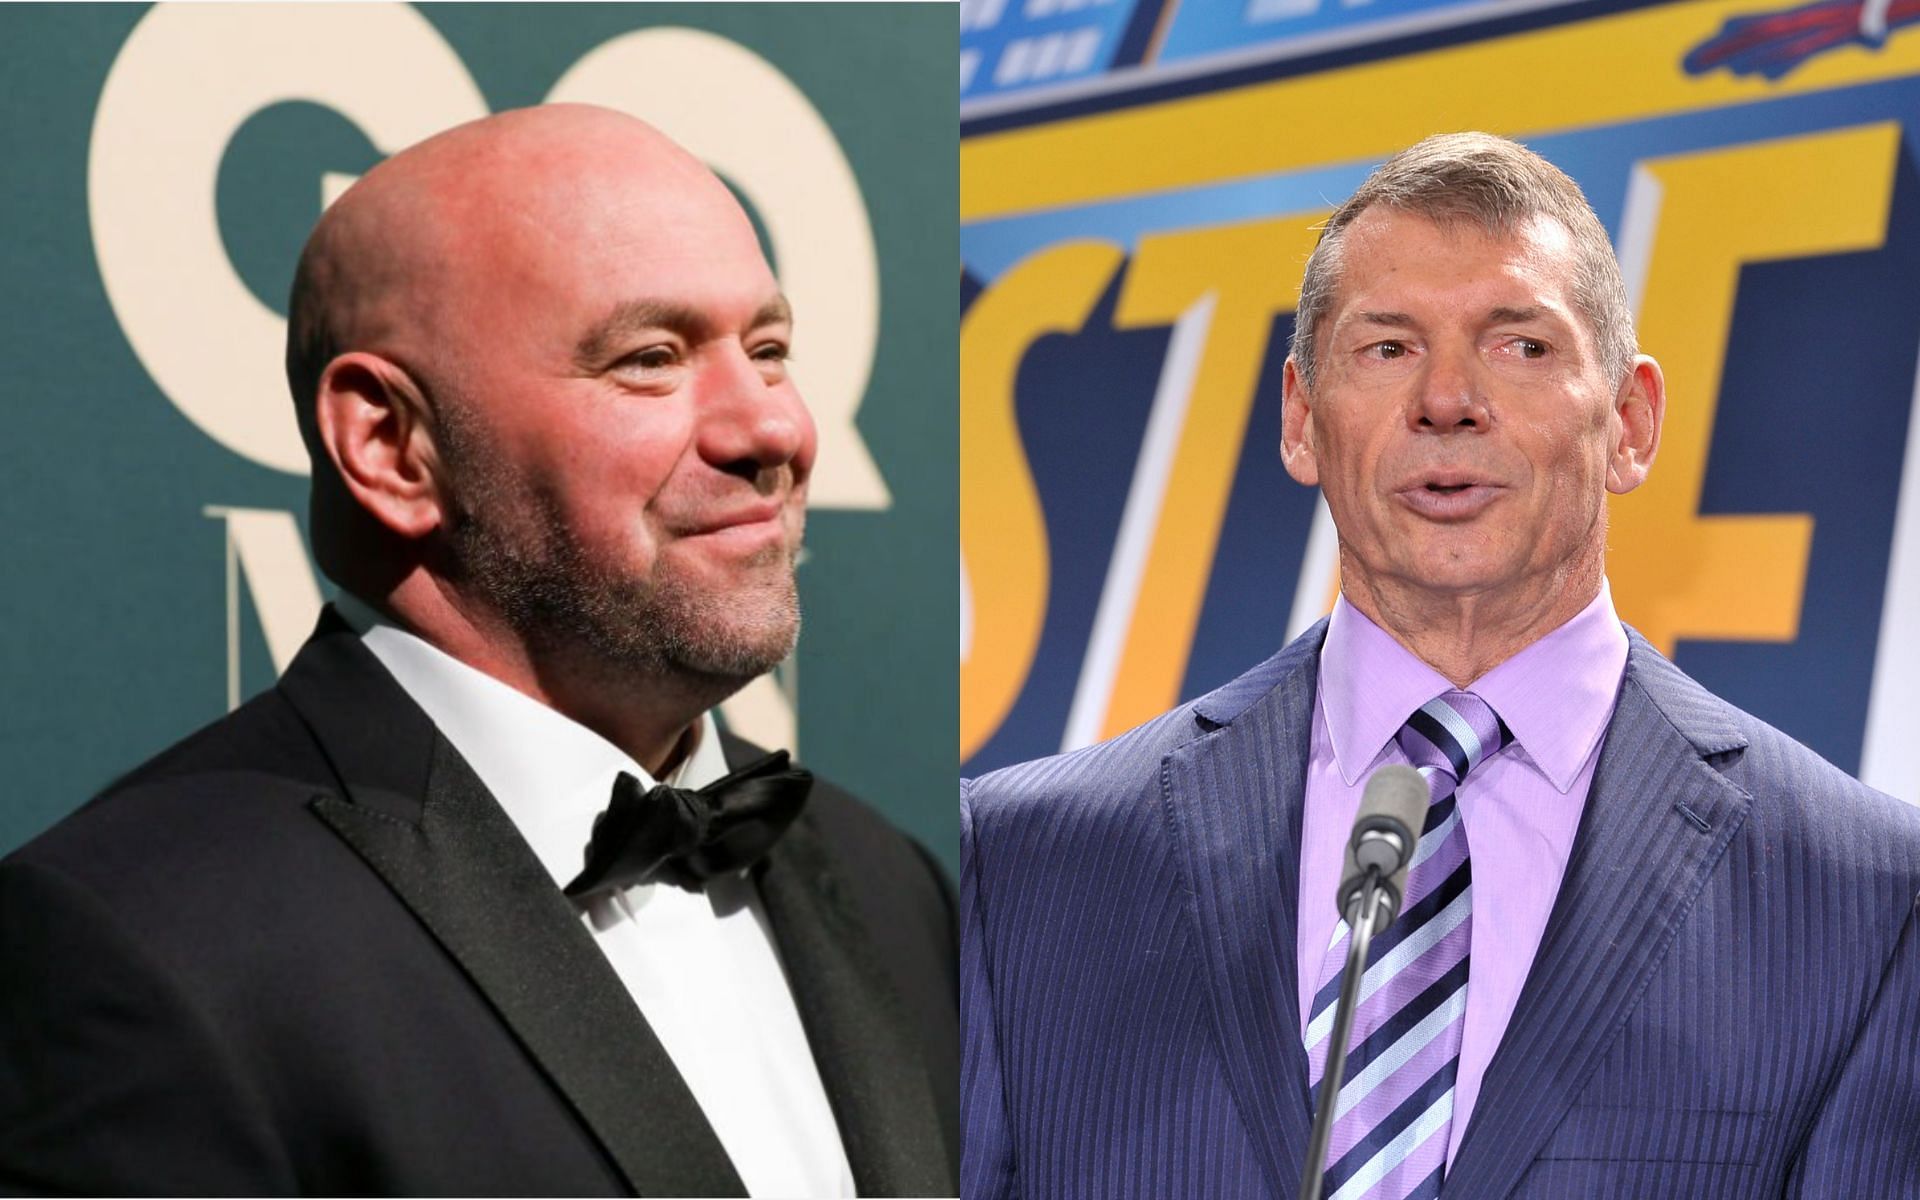 Dana White (left) and Vince McMahon (right). [Images courtesy: both images from Getty Images]